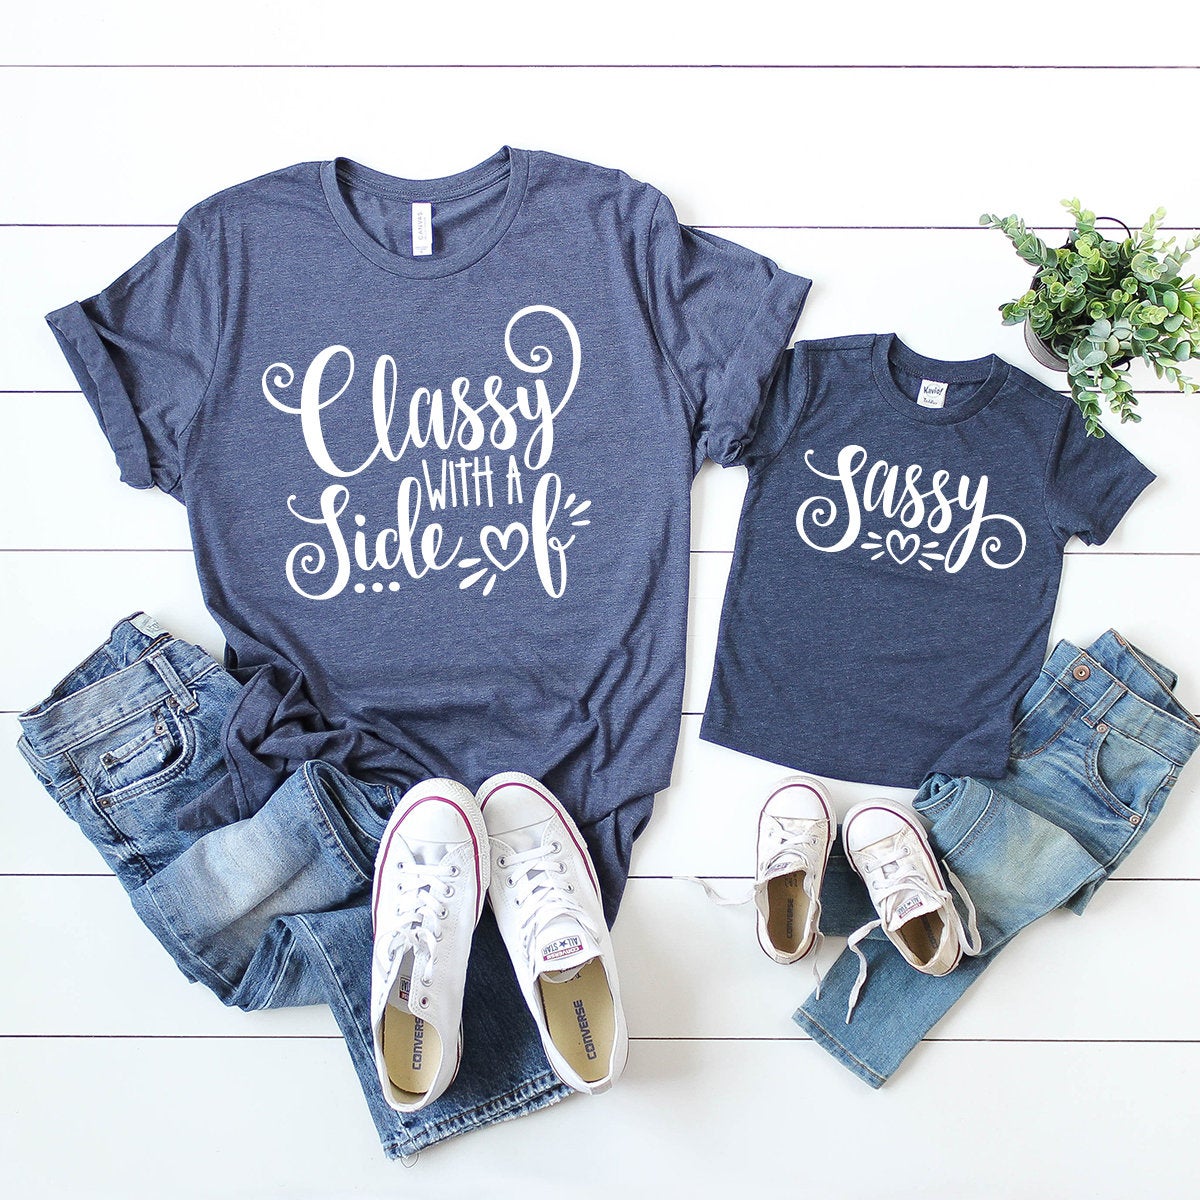 Sassy TShirt, Mama Girl Shirt, Matching Mom And Baby Tee, Classy With A Side Of Sassy, Mama Shirt, Mommy And Me Shirt, Mother Daugther Shirt - Fastdeliverytees.com